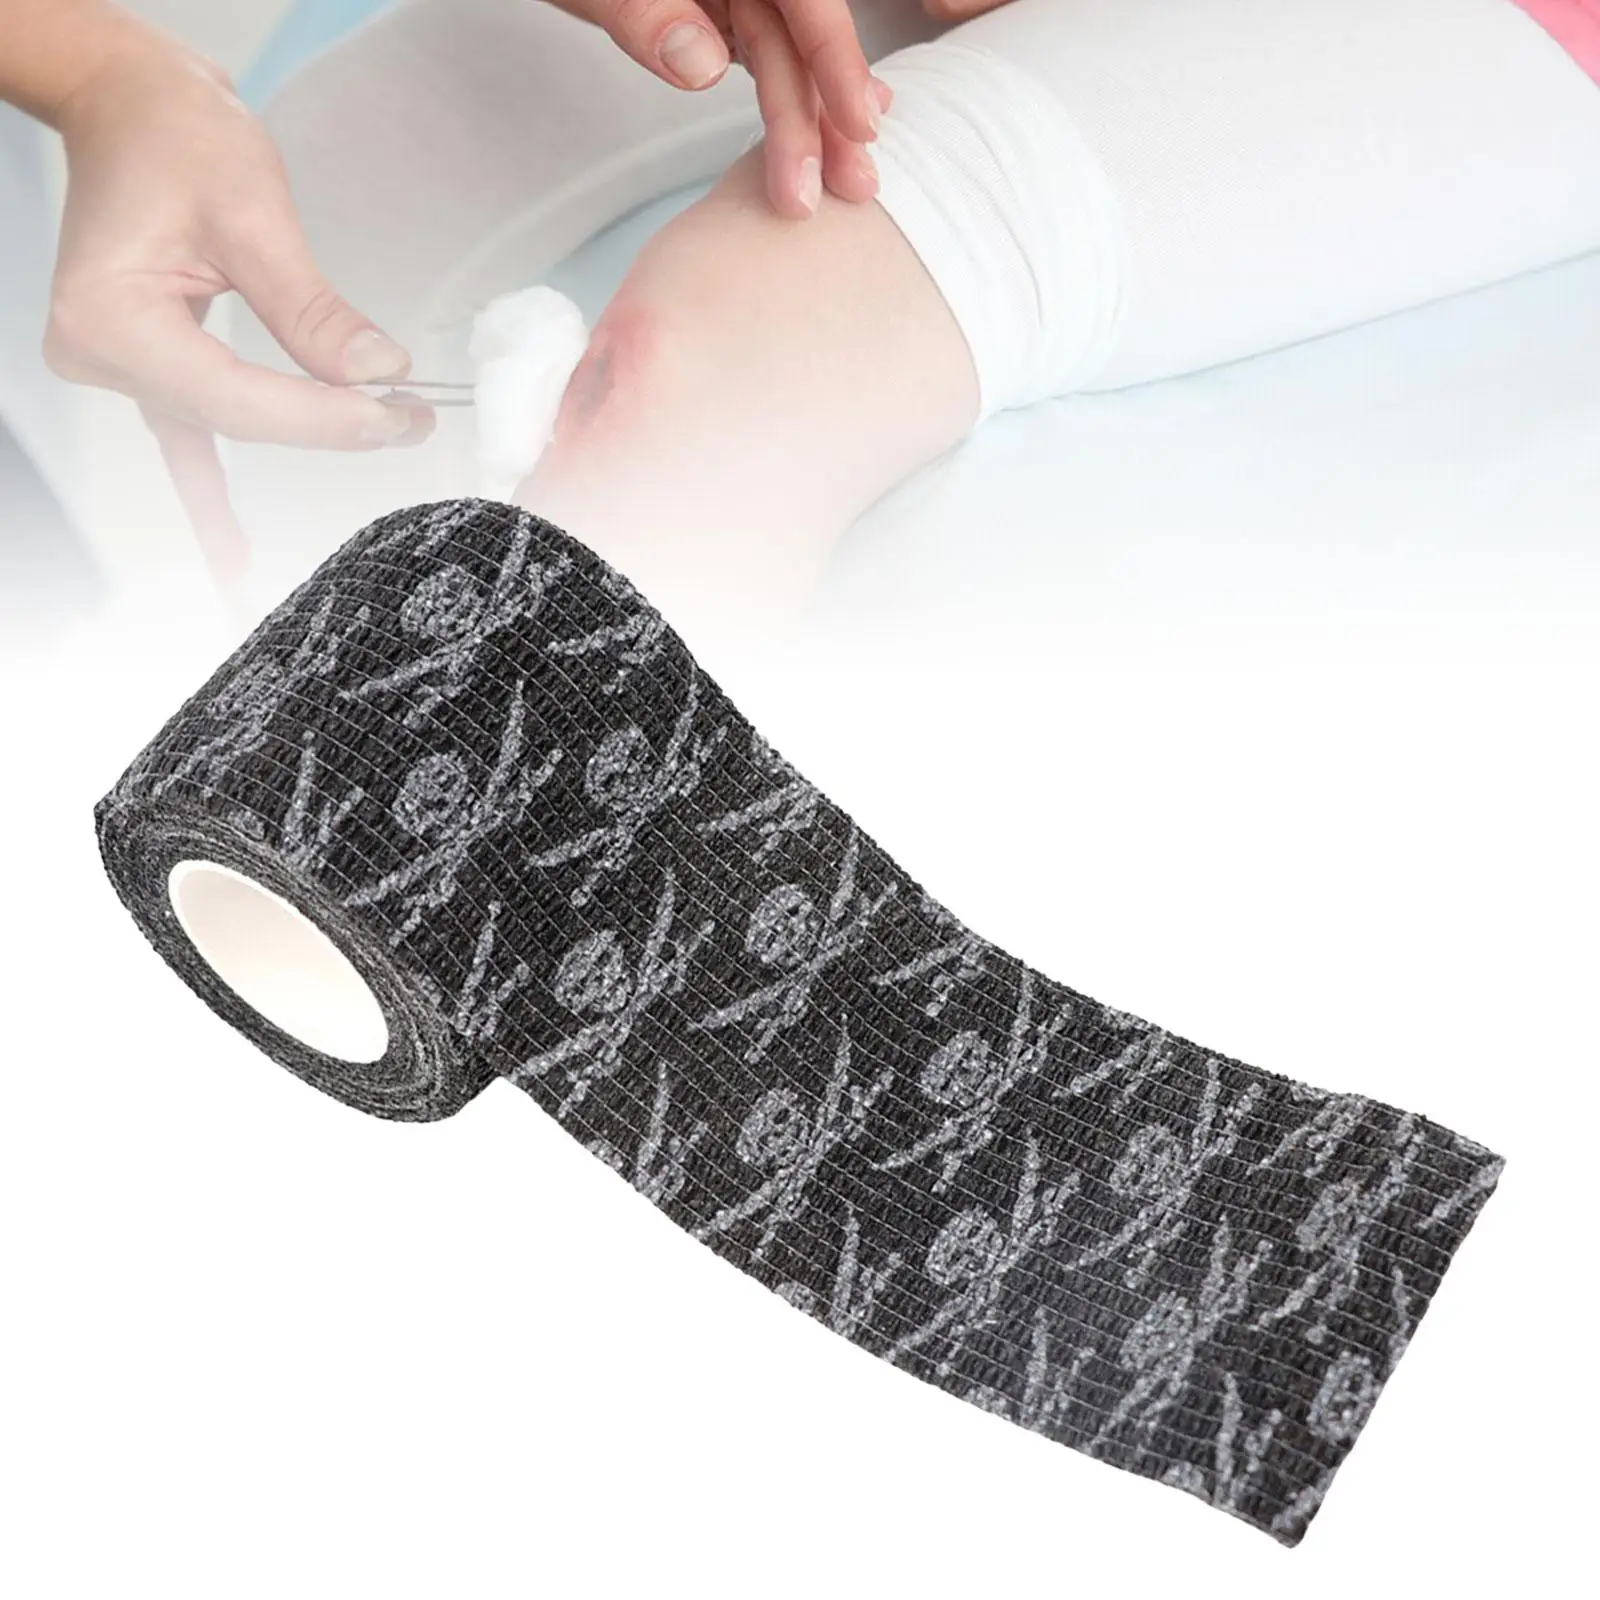 Self Adhesive Wrap Cohesive Sports Wrap Tape for Wrist Ankle